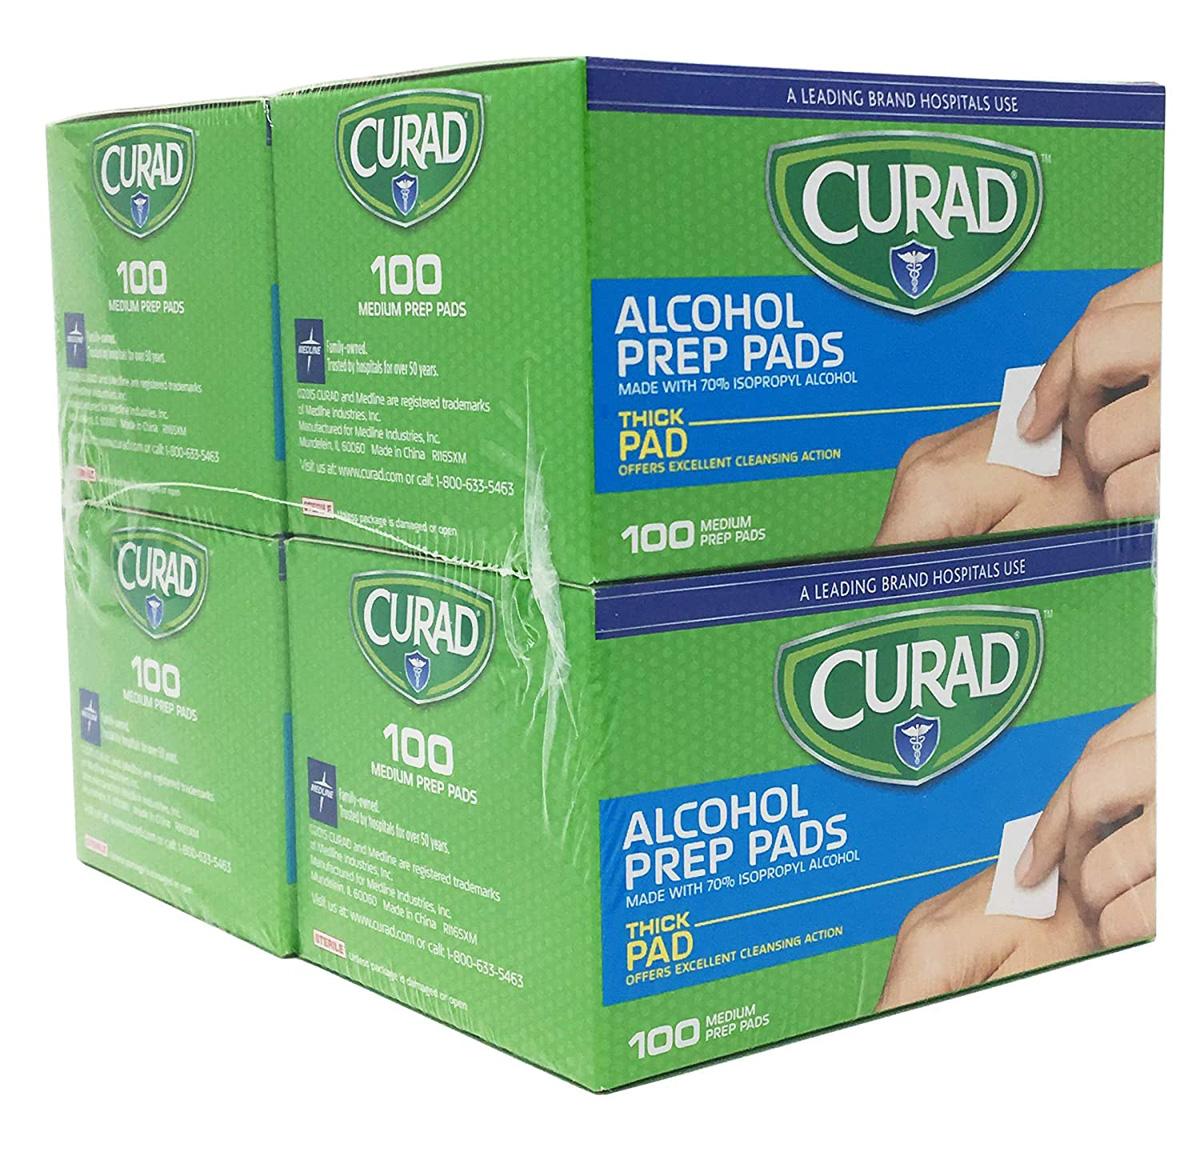 4-Pack 100-Count Curad Alcohol Prep Pads for $4.49